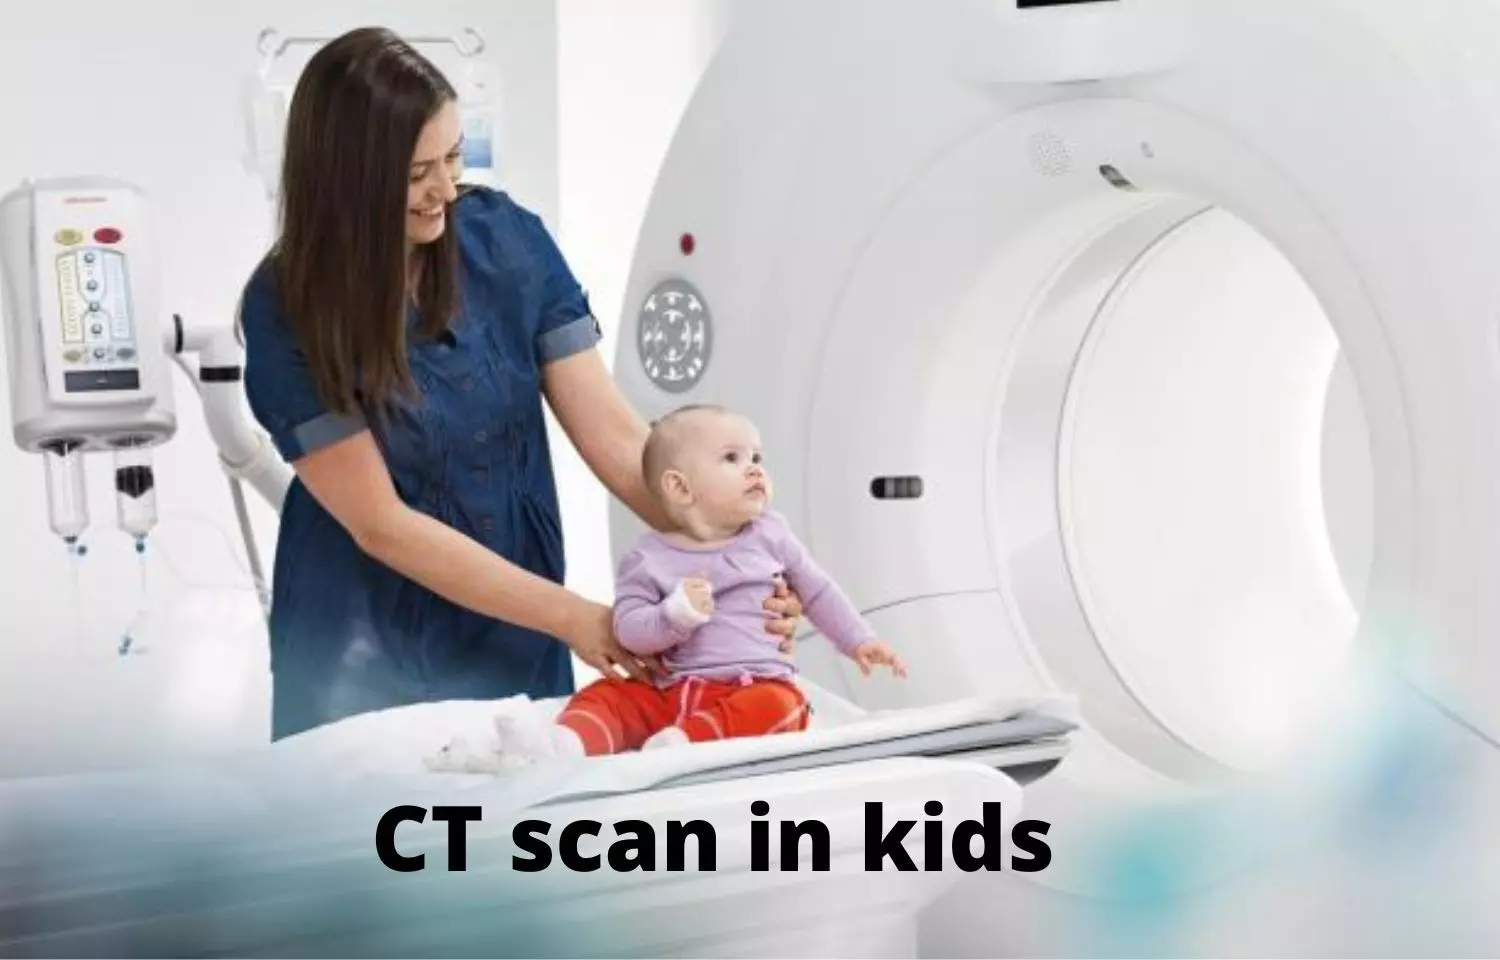 Chest CT not reliable for distinguishing malignant tumors from benign pulmonary anomalies in kids: JAMA